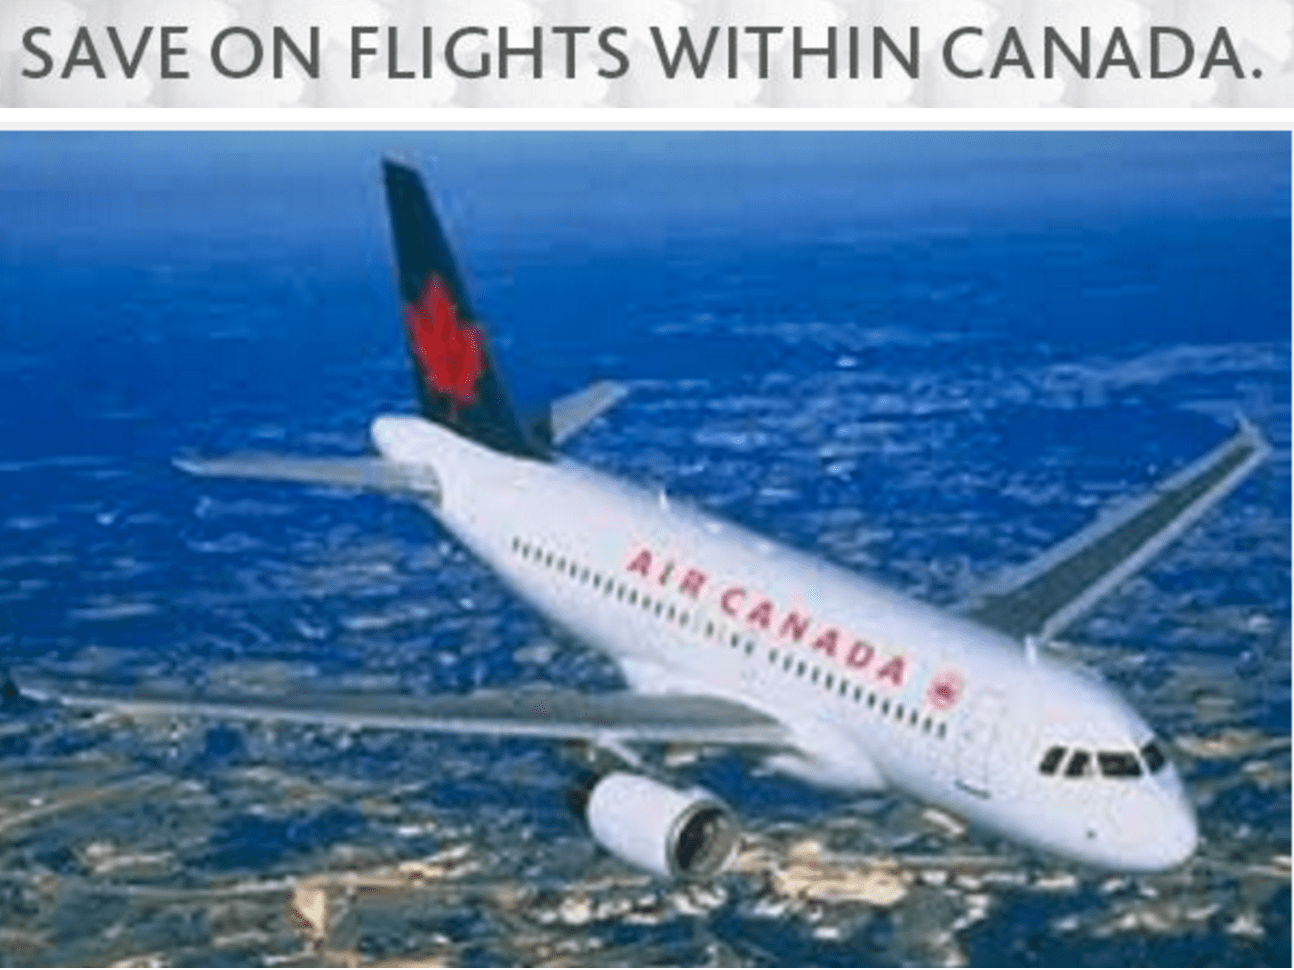 Air Canada Promotion: Save On Flights to Select